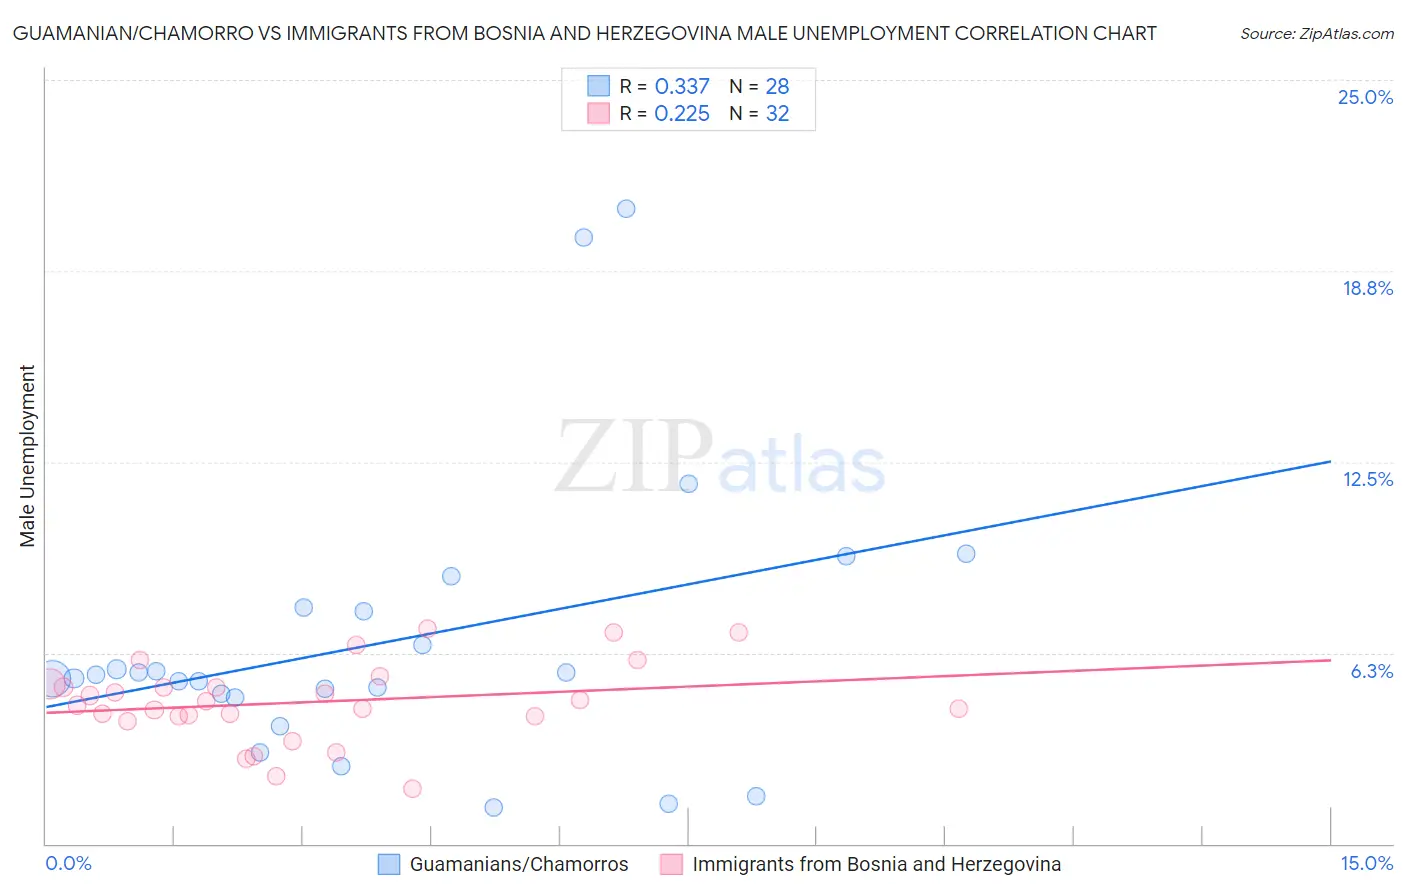 Guamanian/Chamorro vs Immigrants from Bosnia and Herzegovina Male Unemployment